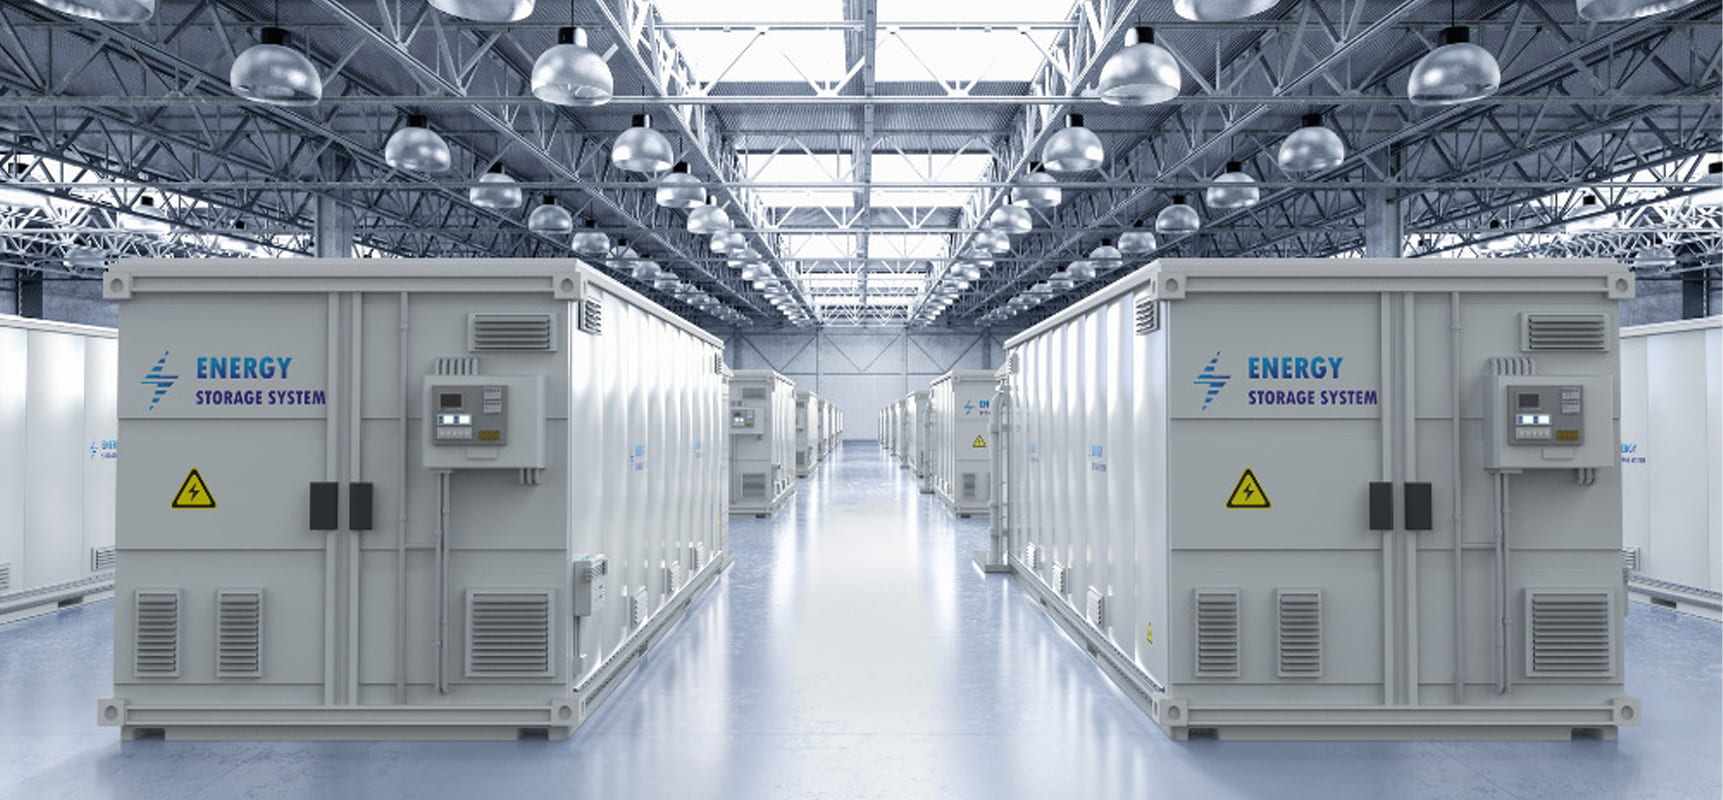 Working Principles Of All-In-One Energy Storage System